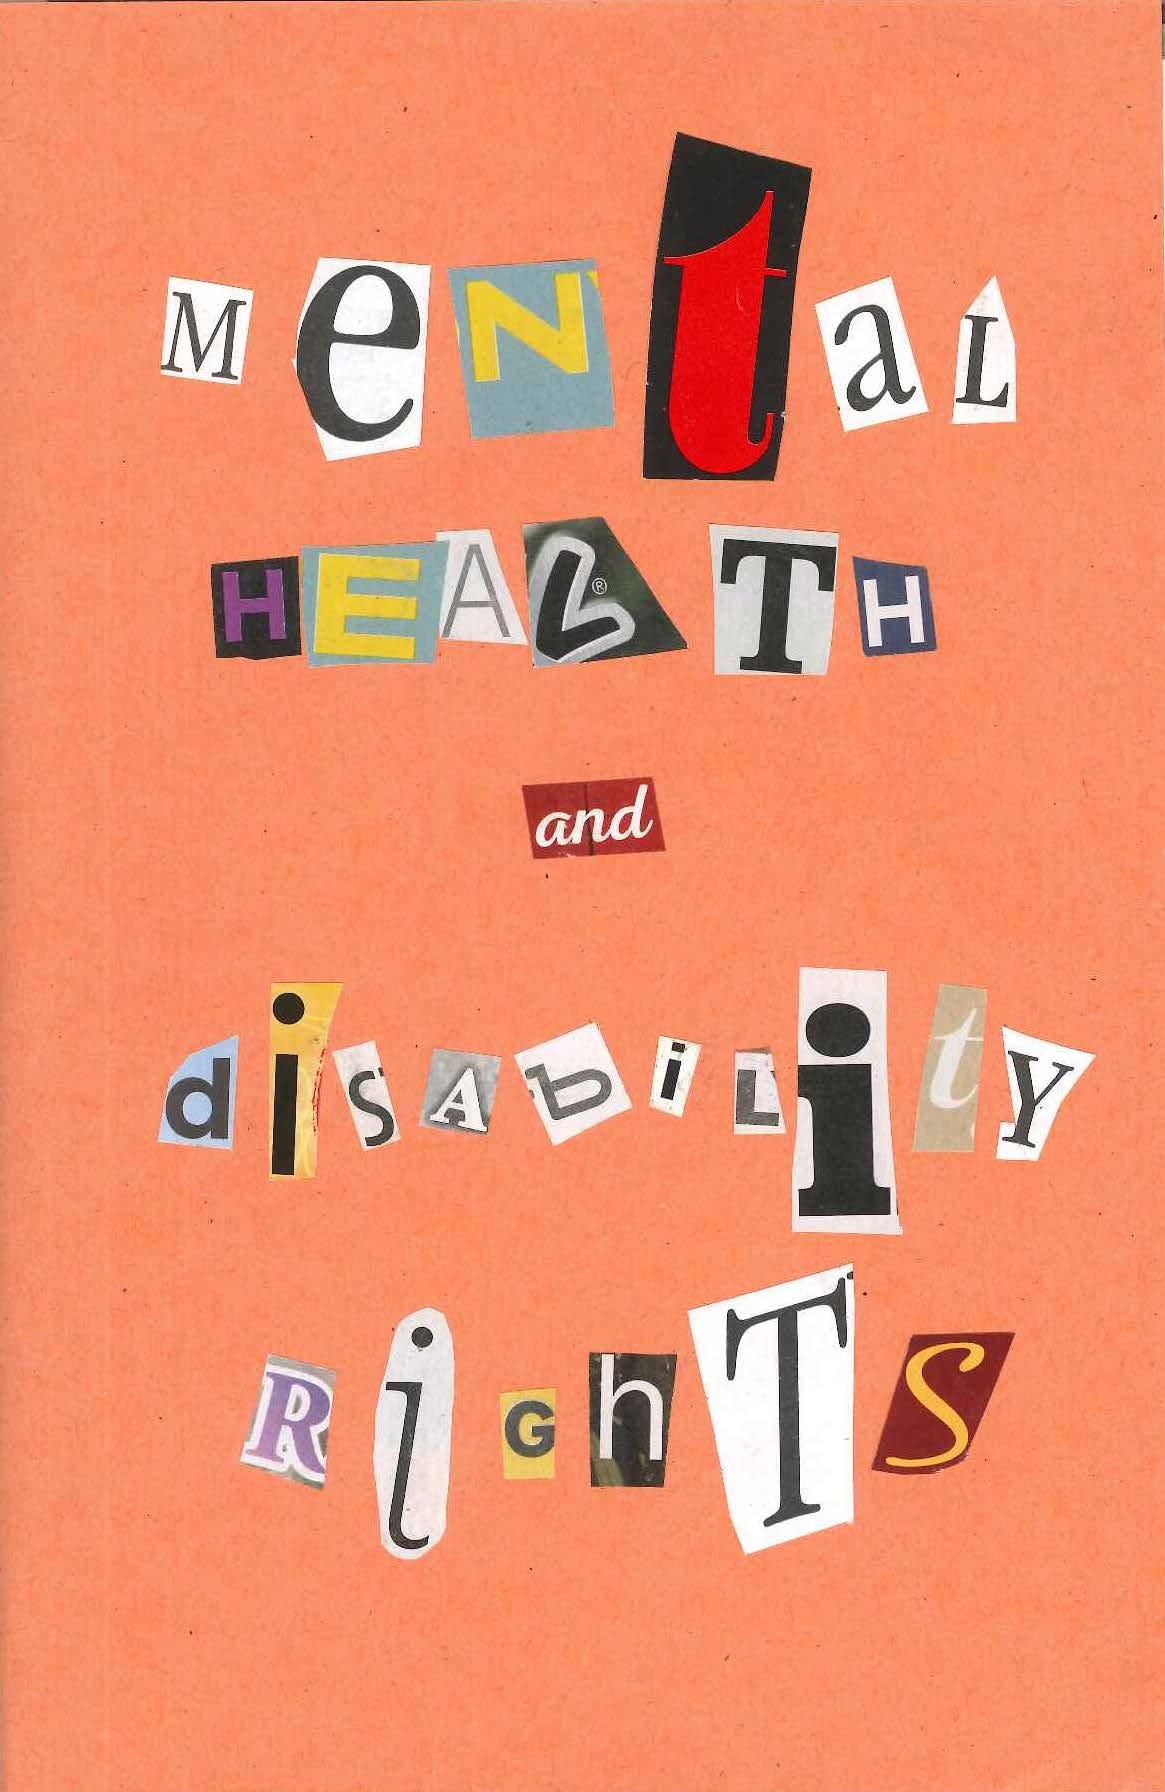 "Mental Health and Disability Rights" Cover Page of Zine